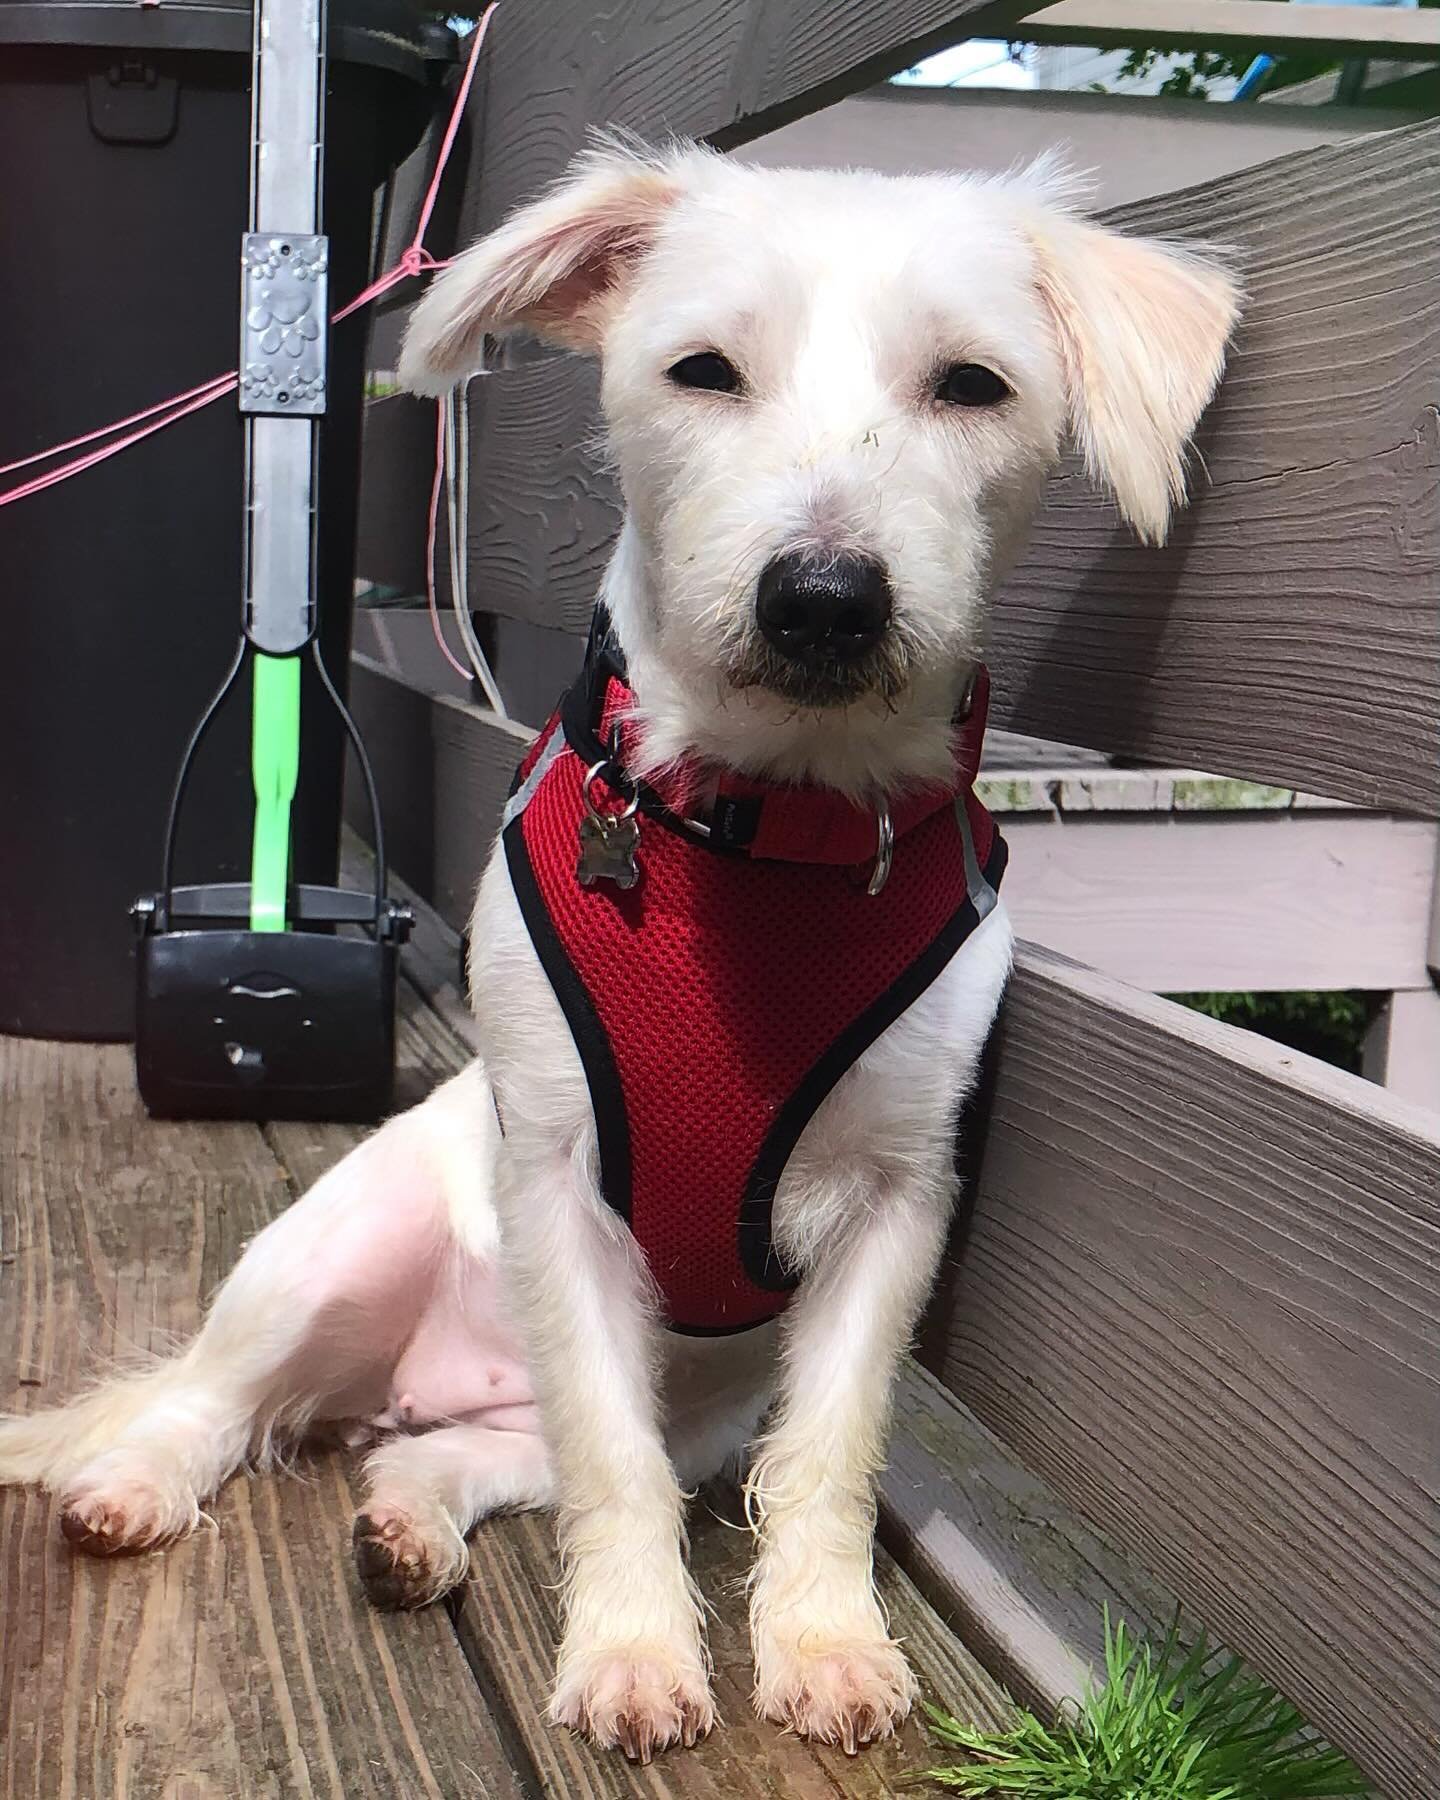 No, we&rsquo;re not posting the same dog again&mdash;meet Margot, the gorgeous 2 year old West Highland Terrier mix weighing in at a petite 18 lbs. We took Margot in from the ACC with her buddy Murray and she is thriving in her foster home. Margot is